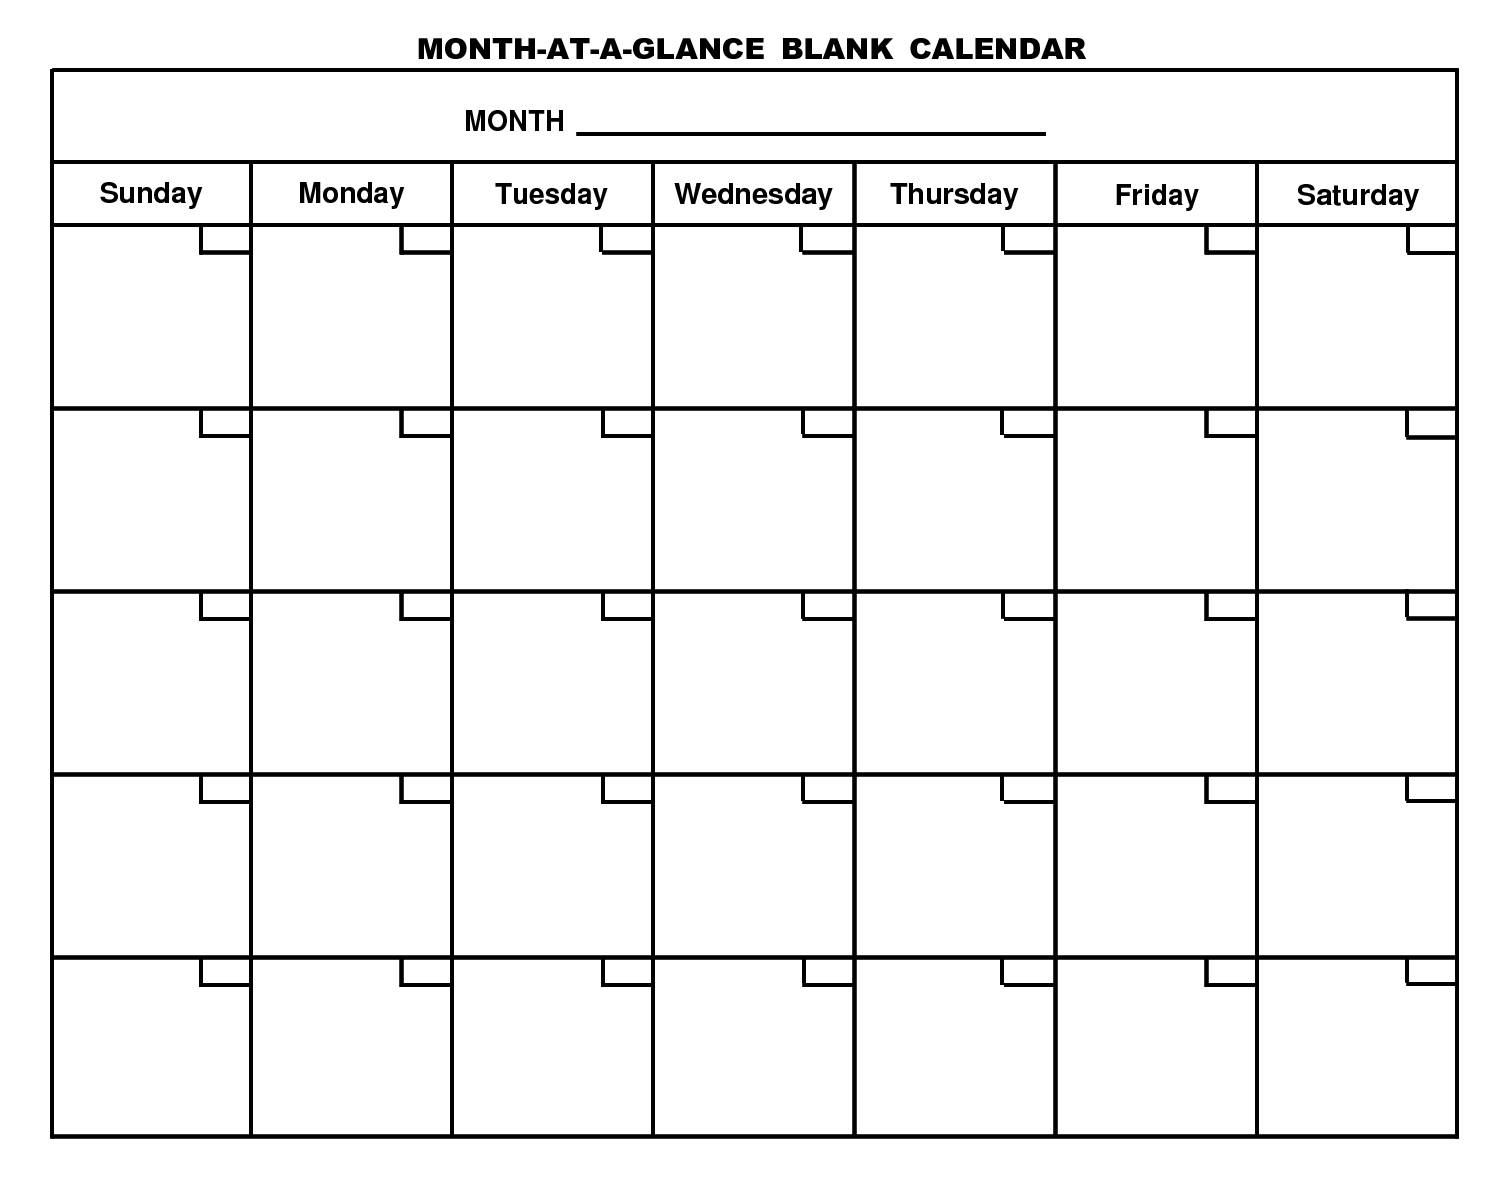 Pin By Stacy Tangren On Work | Free Printable Calendar Month At A Glance Calendar Free Editable